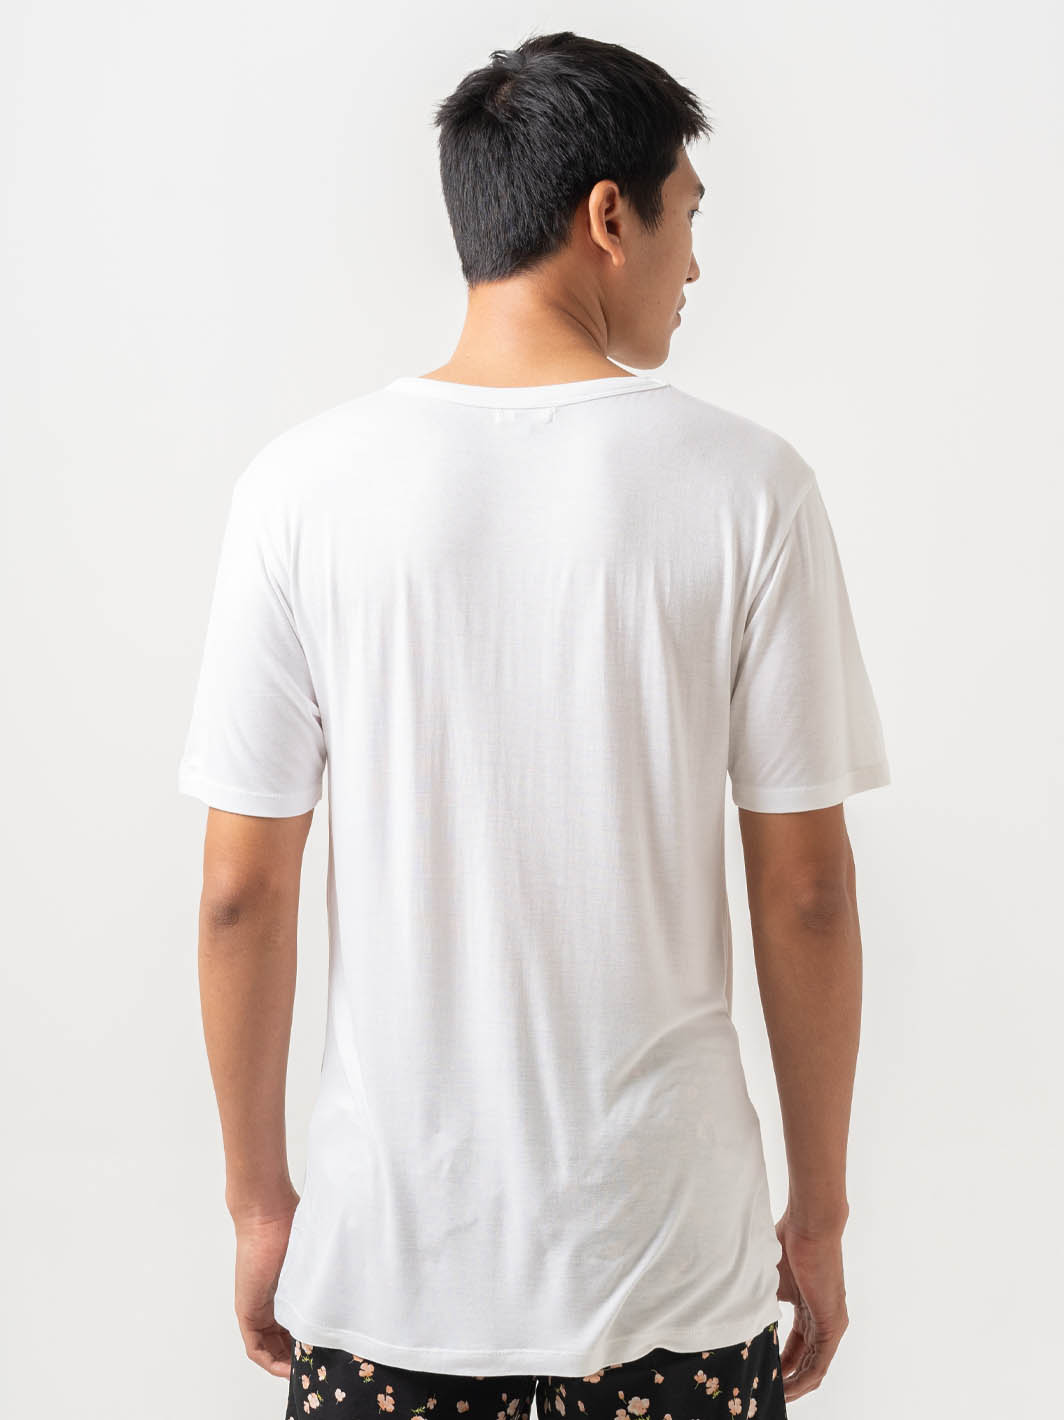 plain eco-conscious t-shirt - Nuisance Tee in white